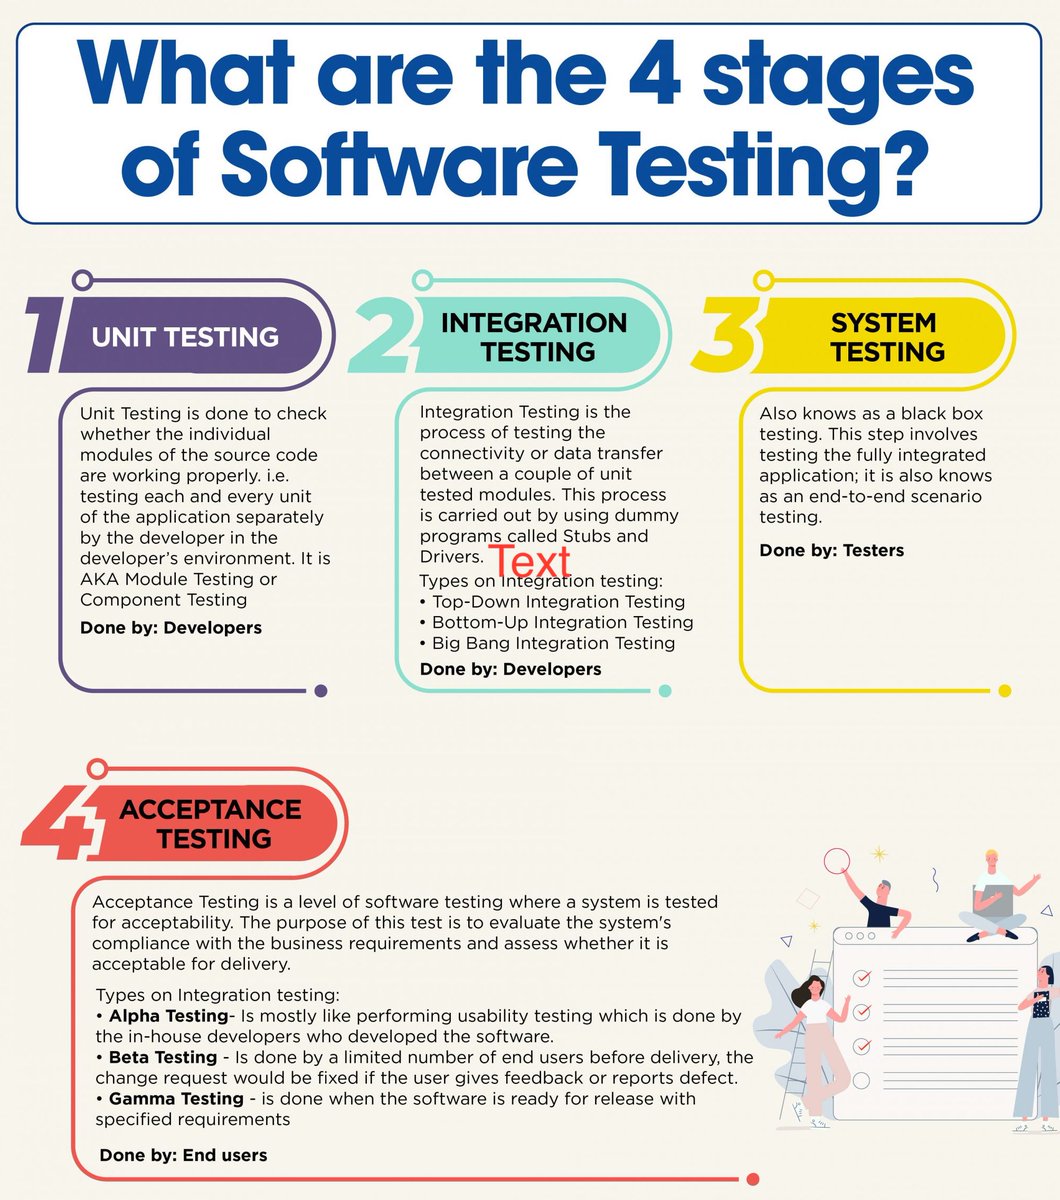 #Infographic: 4 Stages of Software Testing!

#Performance #Monitoring #APM #Application #Website #Web #Technology #AI #AIOps #Innovation #TechTrends #Testing #DigitalTransformation #EmergingTech

cc: @HaroldSinnott @antgrasso @LindaGrass0 @ingliguori @PerfBytes @TestingCircus